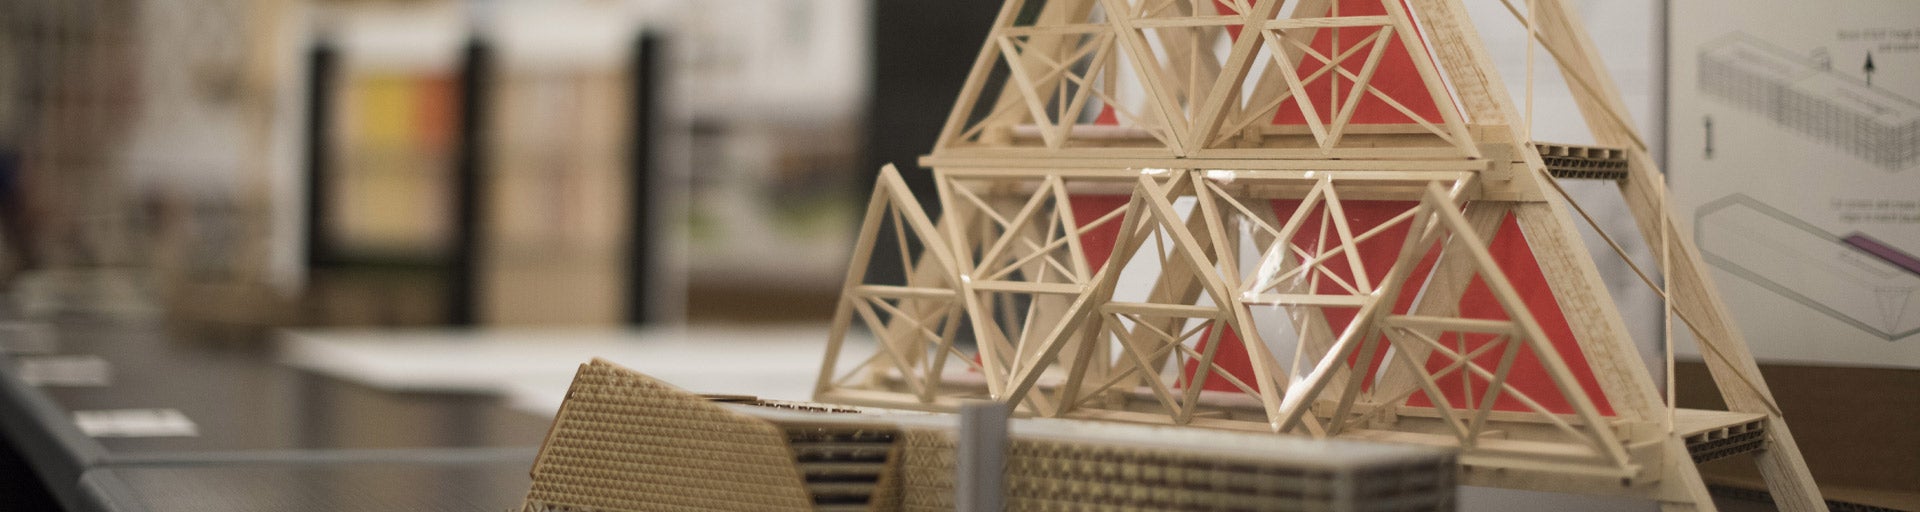 wooden architecture model pyramid